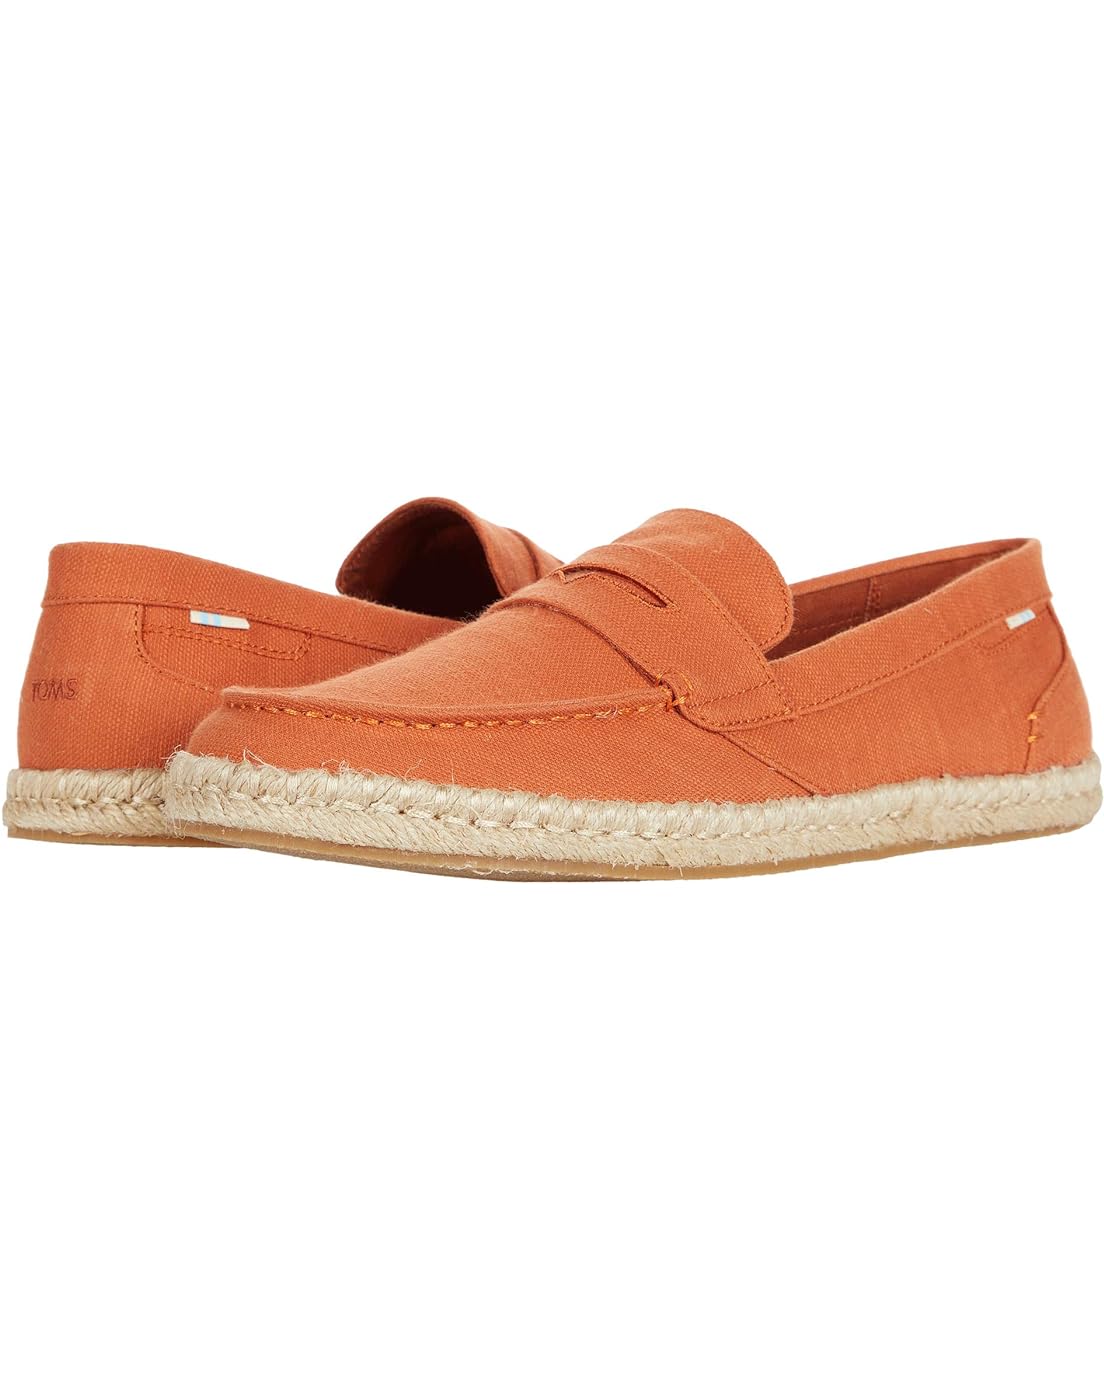 TOMS Stanford Rope